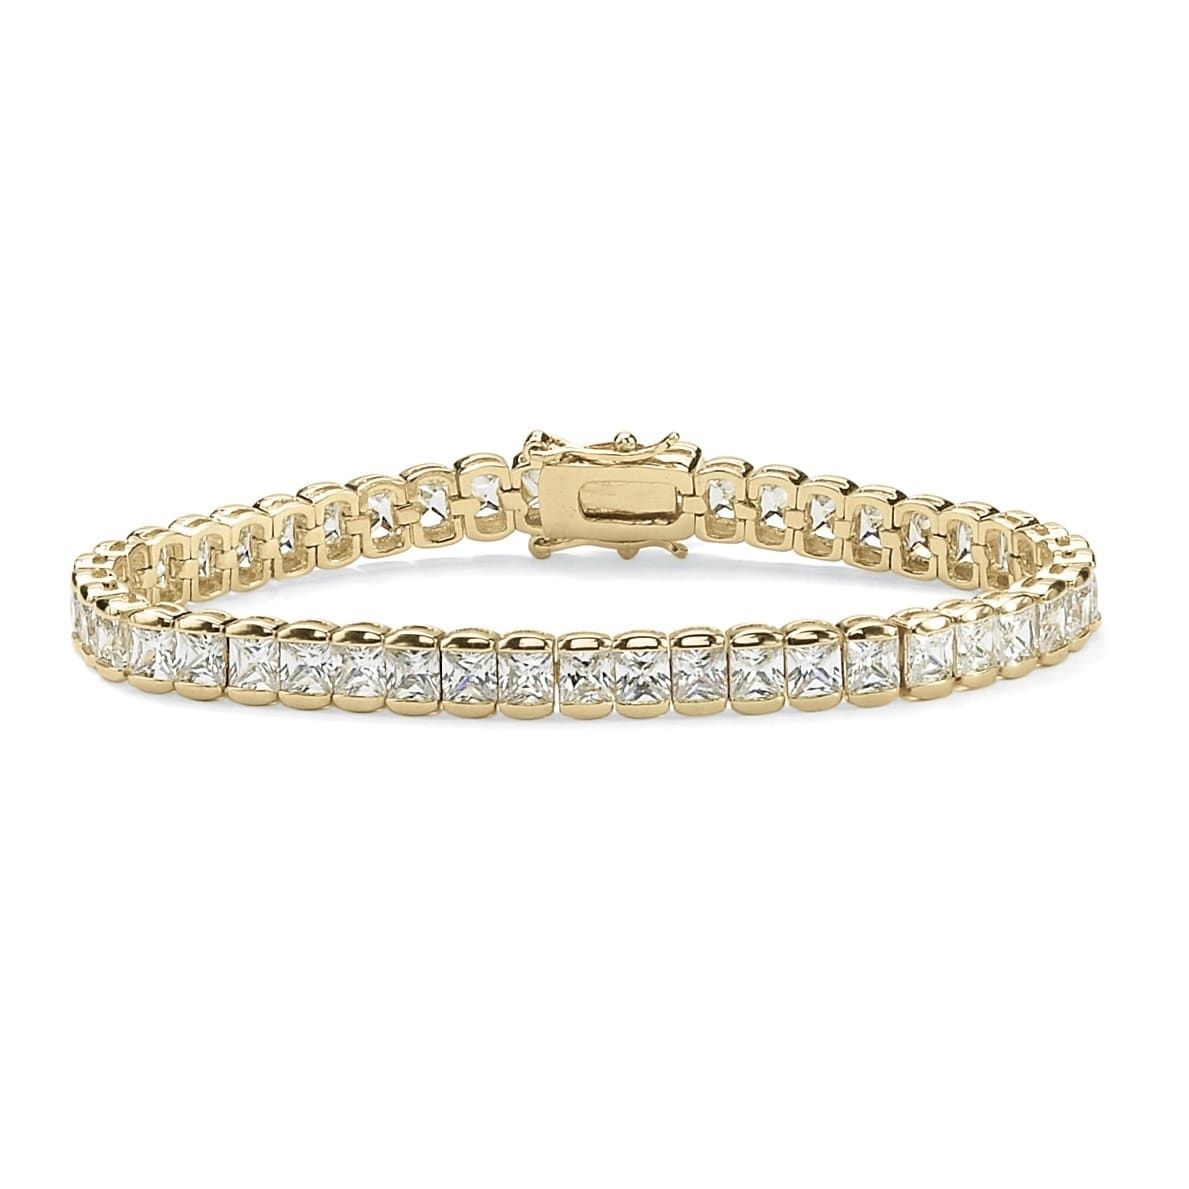 Details about   Round Cubic Zirconia Tennis Bracelet Women Jewelry Gift 14K White Gold Plated